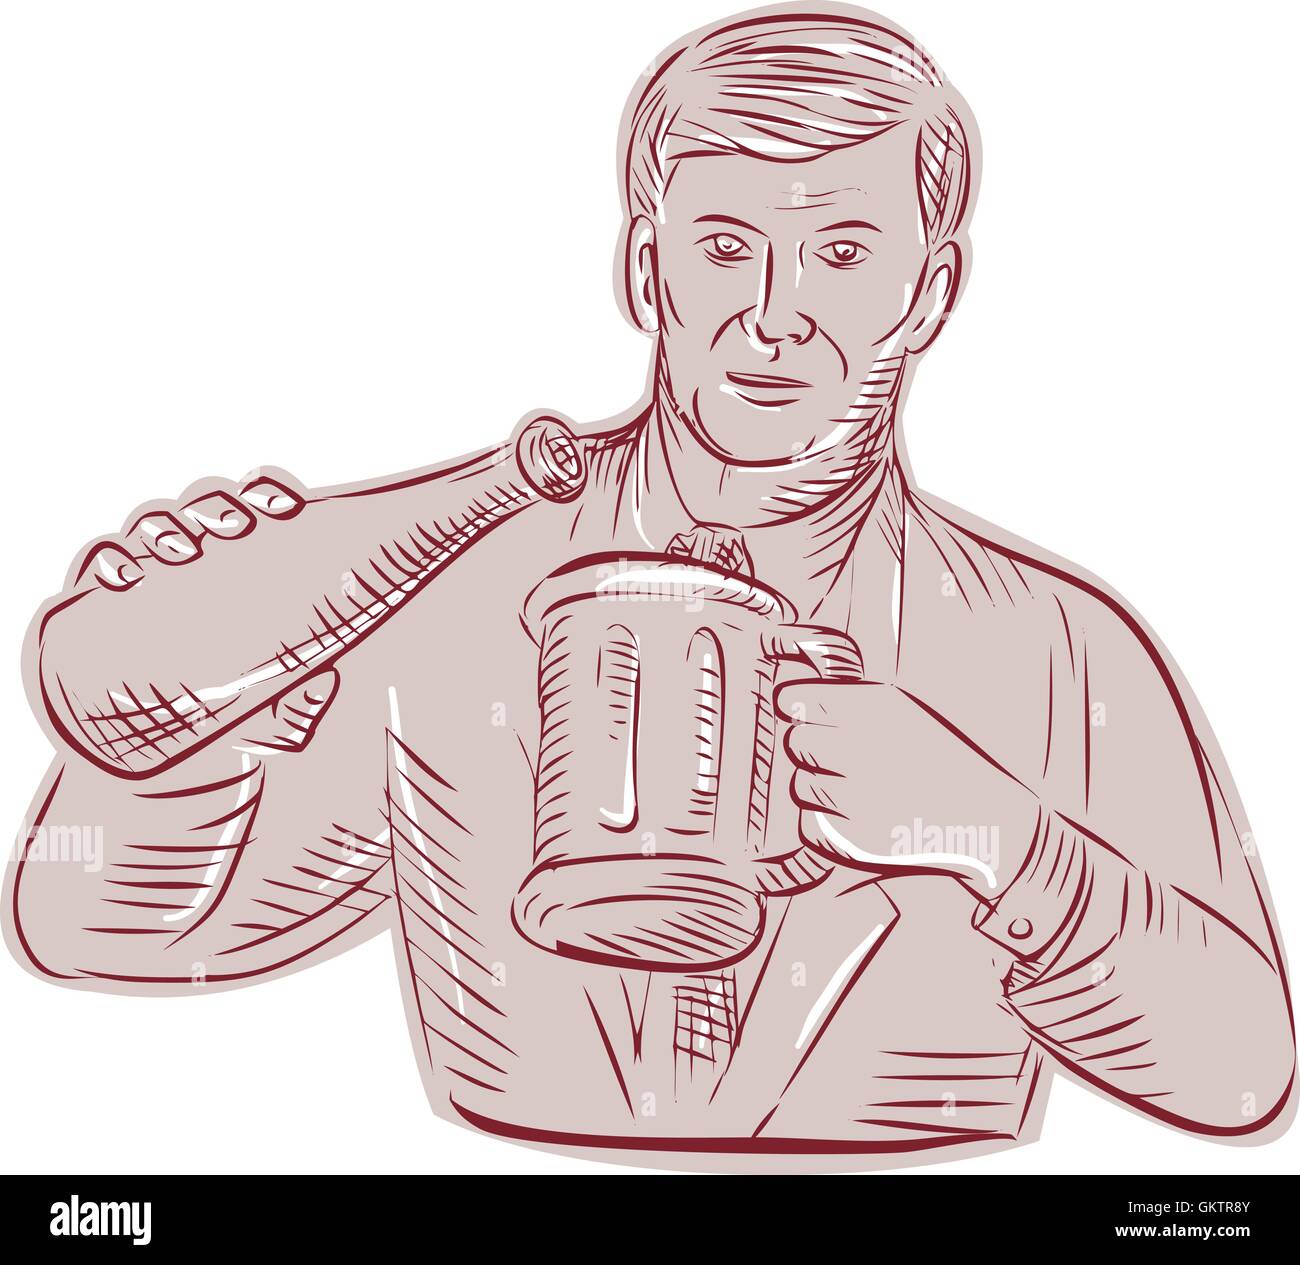 Man Pouring Beer Mug Etching Stock Vector